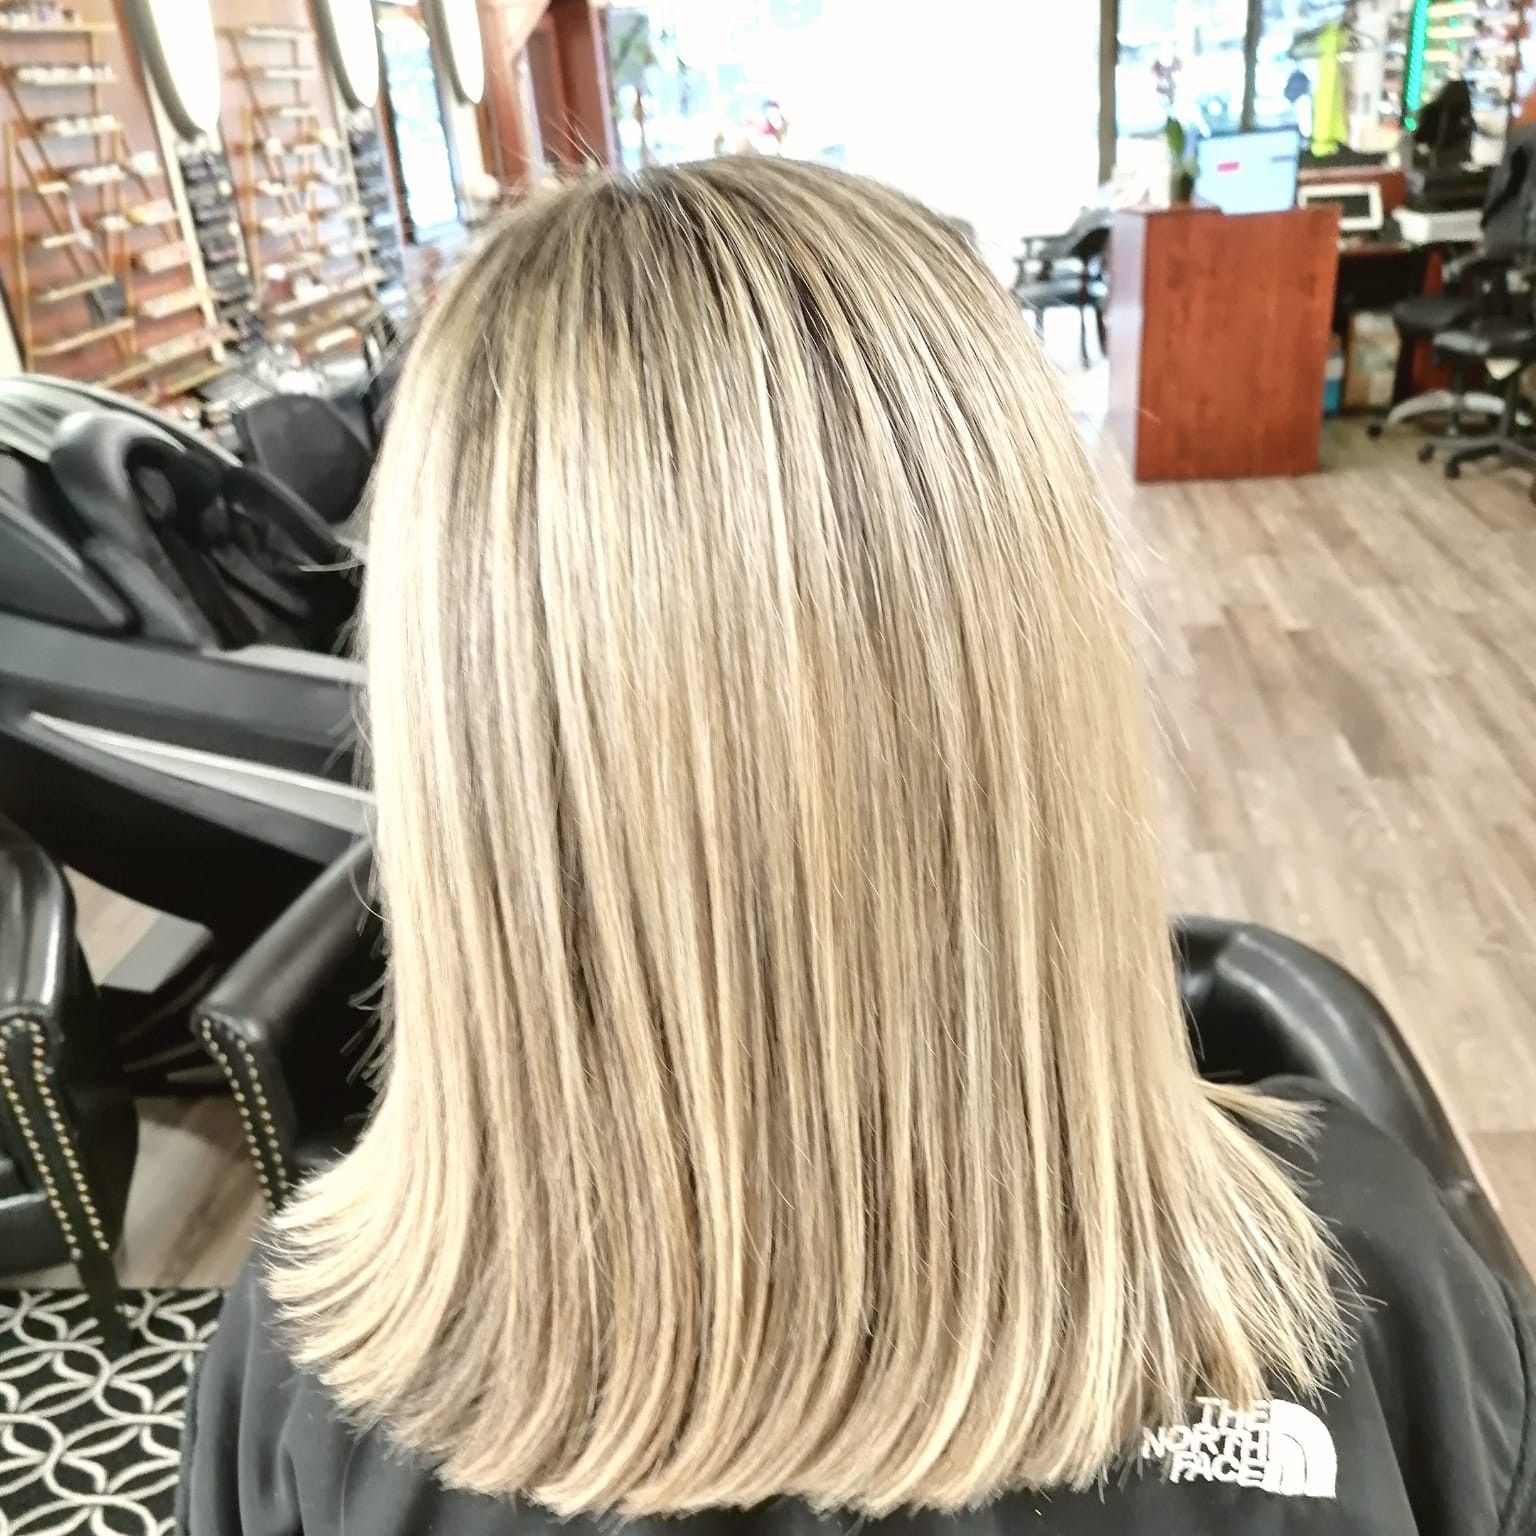 Haircut & Blow-dry promotion Monday, Tuesday, Wed. portfolio